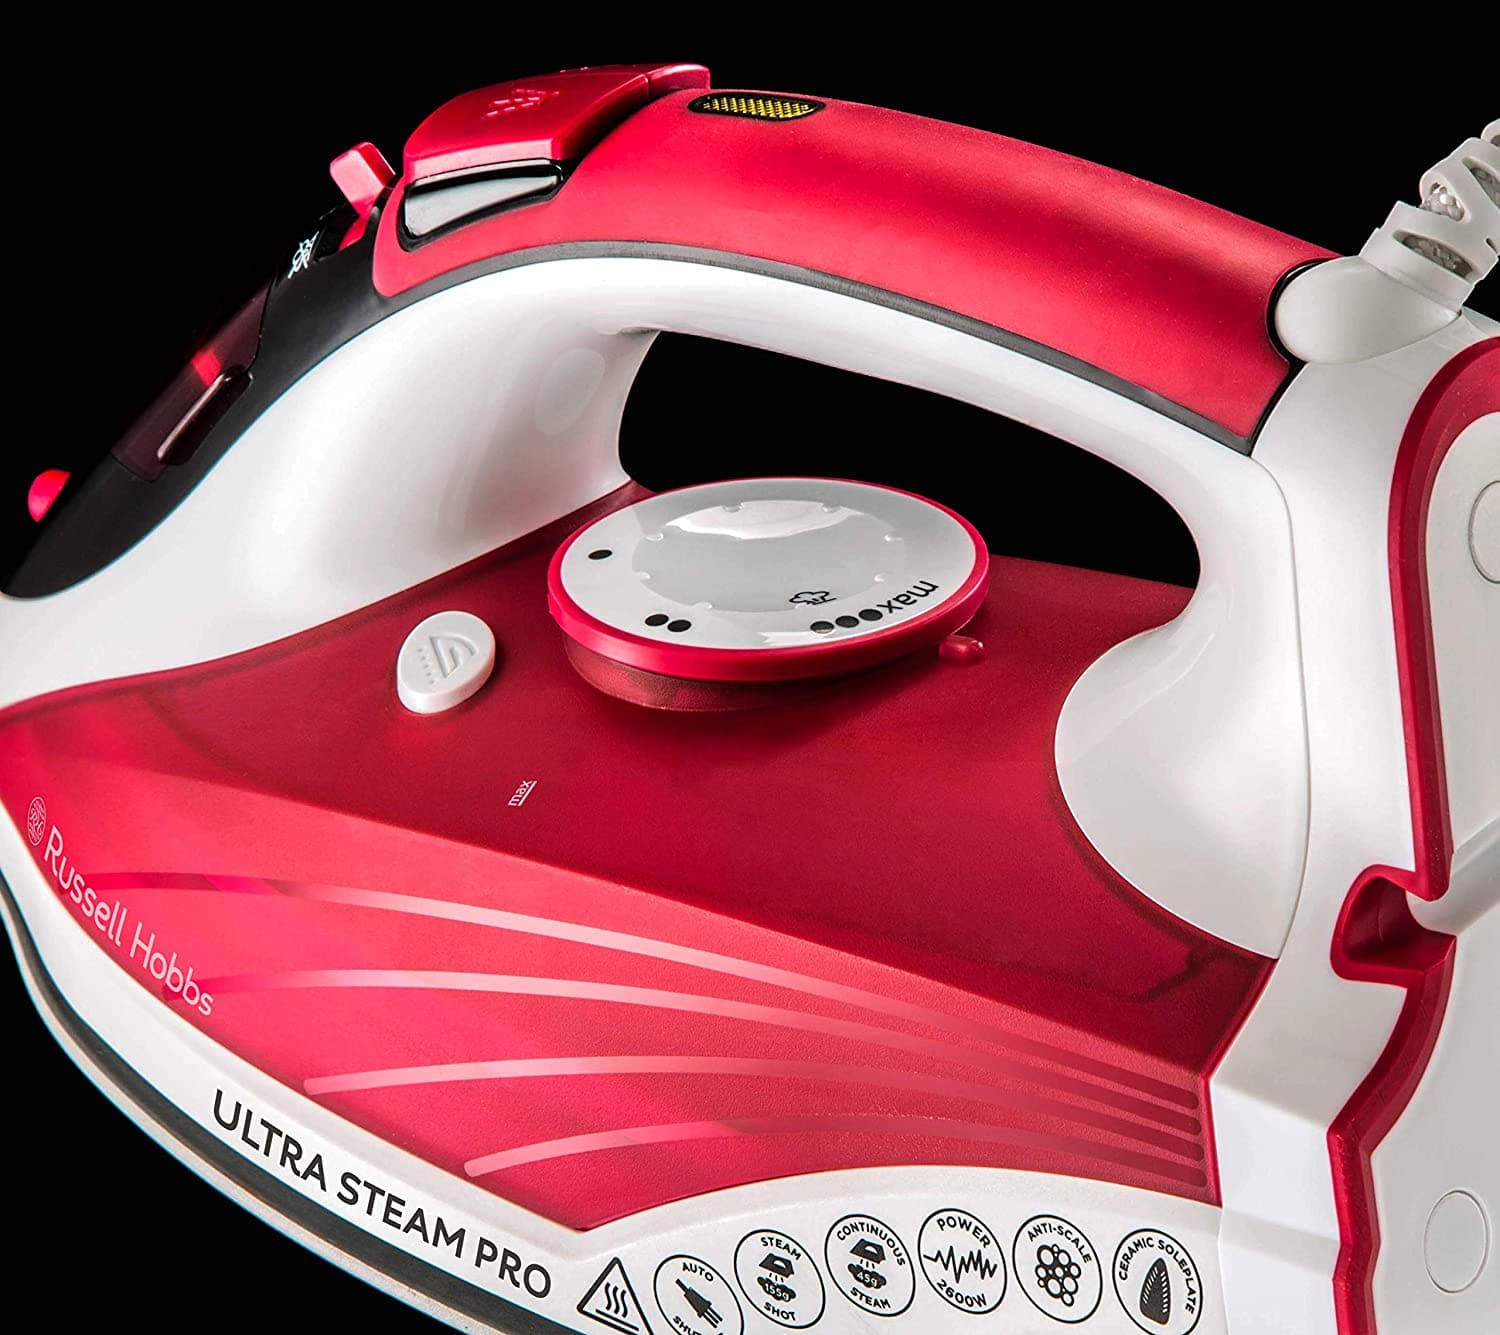 Russell Hobbs Ultra Steam Pro Red 2600W-23990GCC - Jashanmal Home